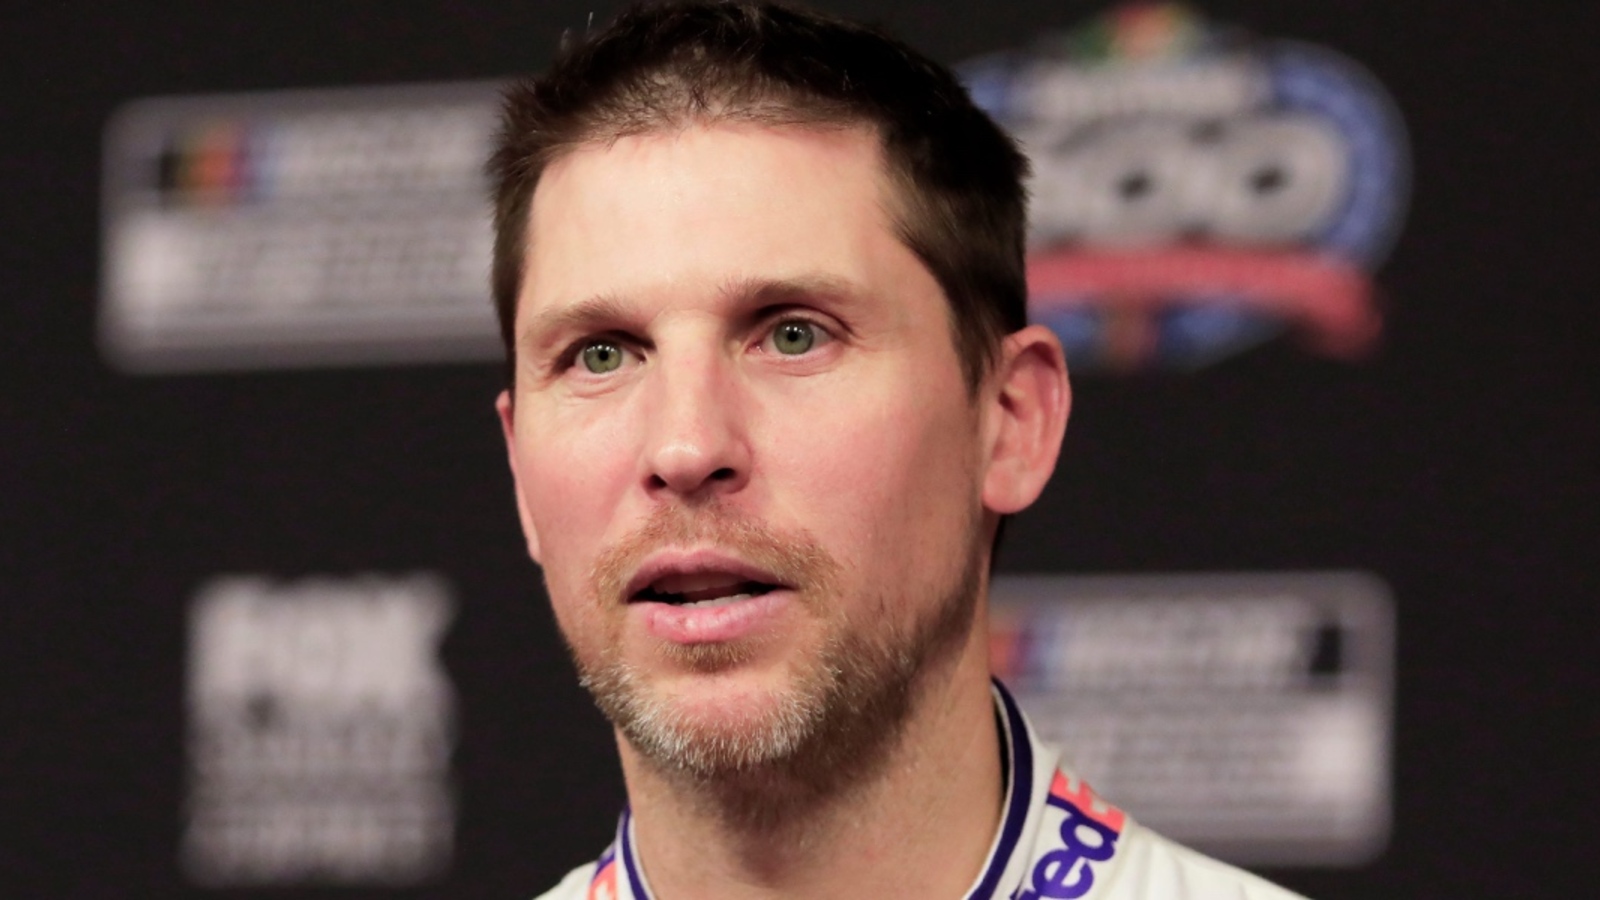 Denny Hamlin on controversy over NASCAR’s Daytona 500 final lap decision: ‘They made the right the call’